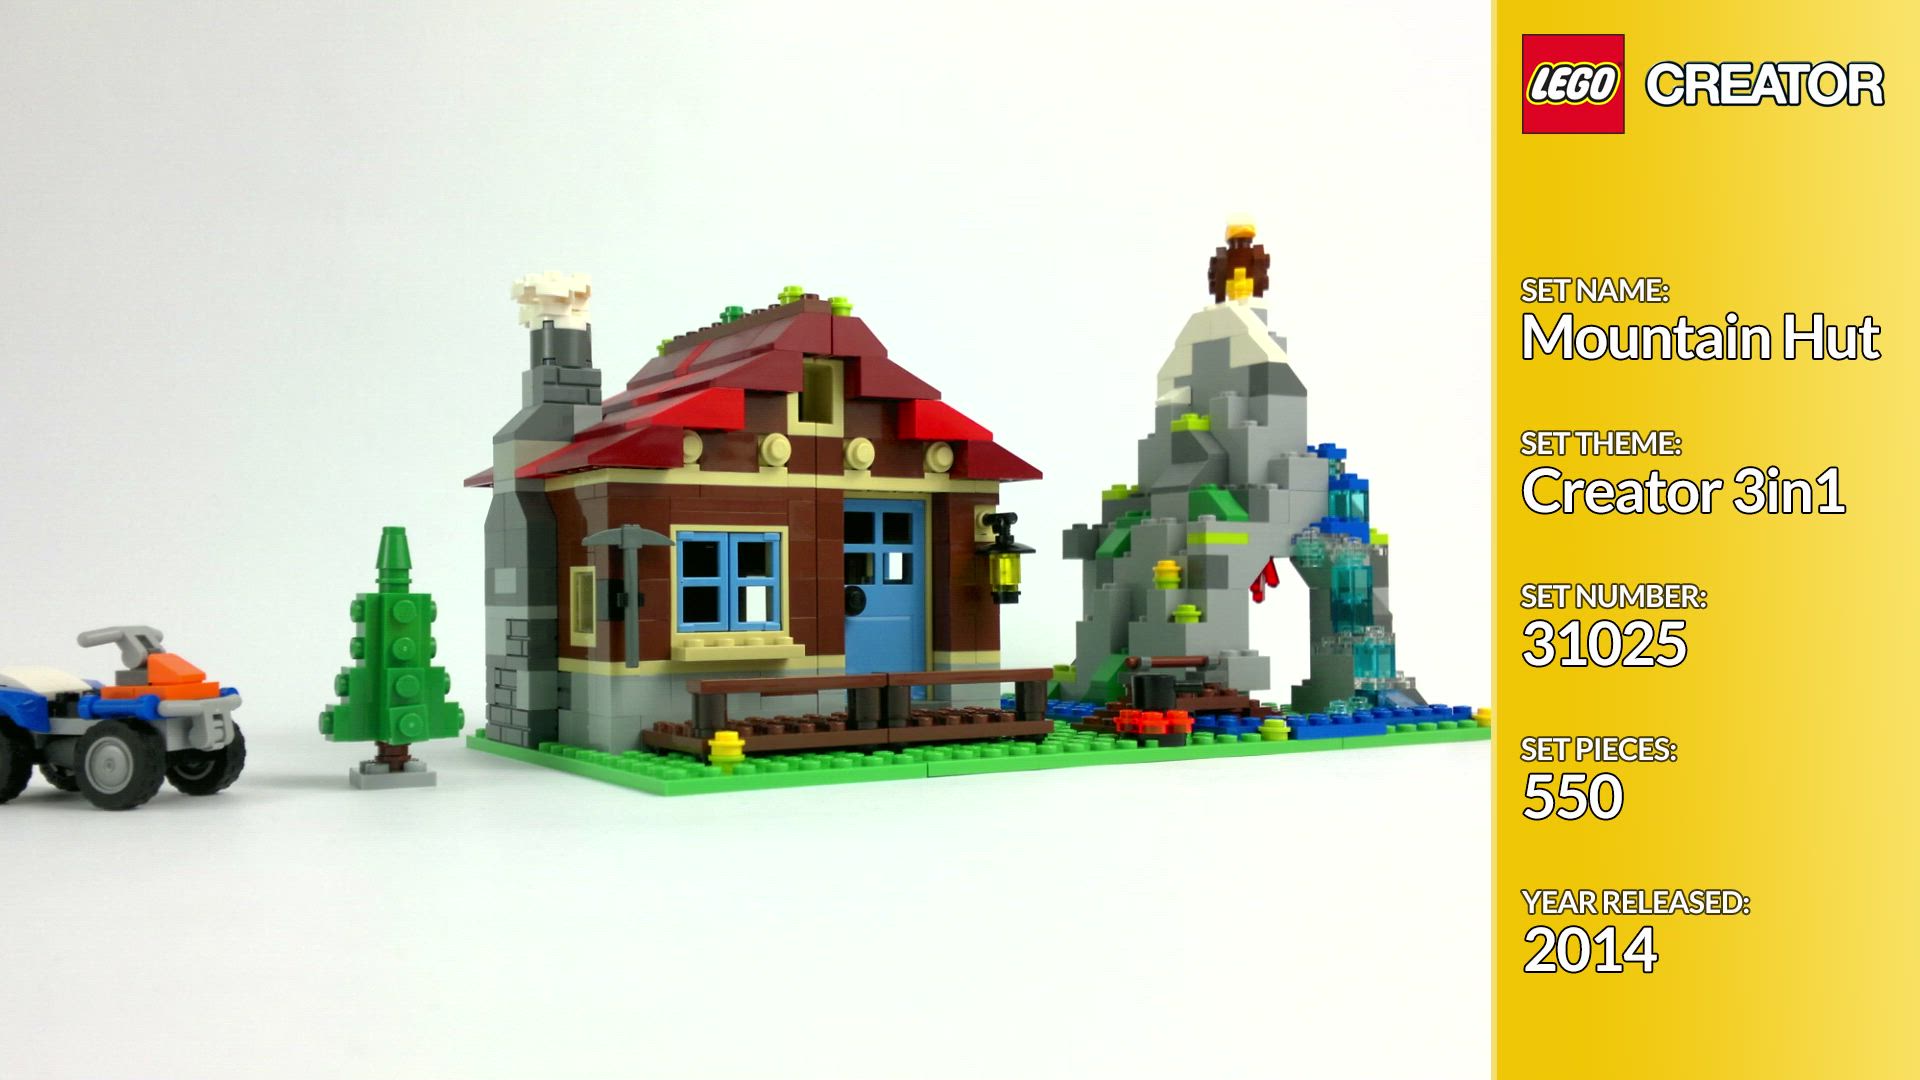 Tung lastbil Reproducere Fælles valg Mountain Hut Goes Castle - LEGO® Creator Videos - LEGO.com for kids